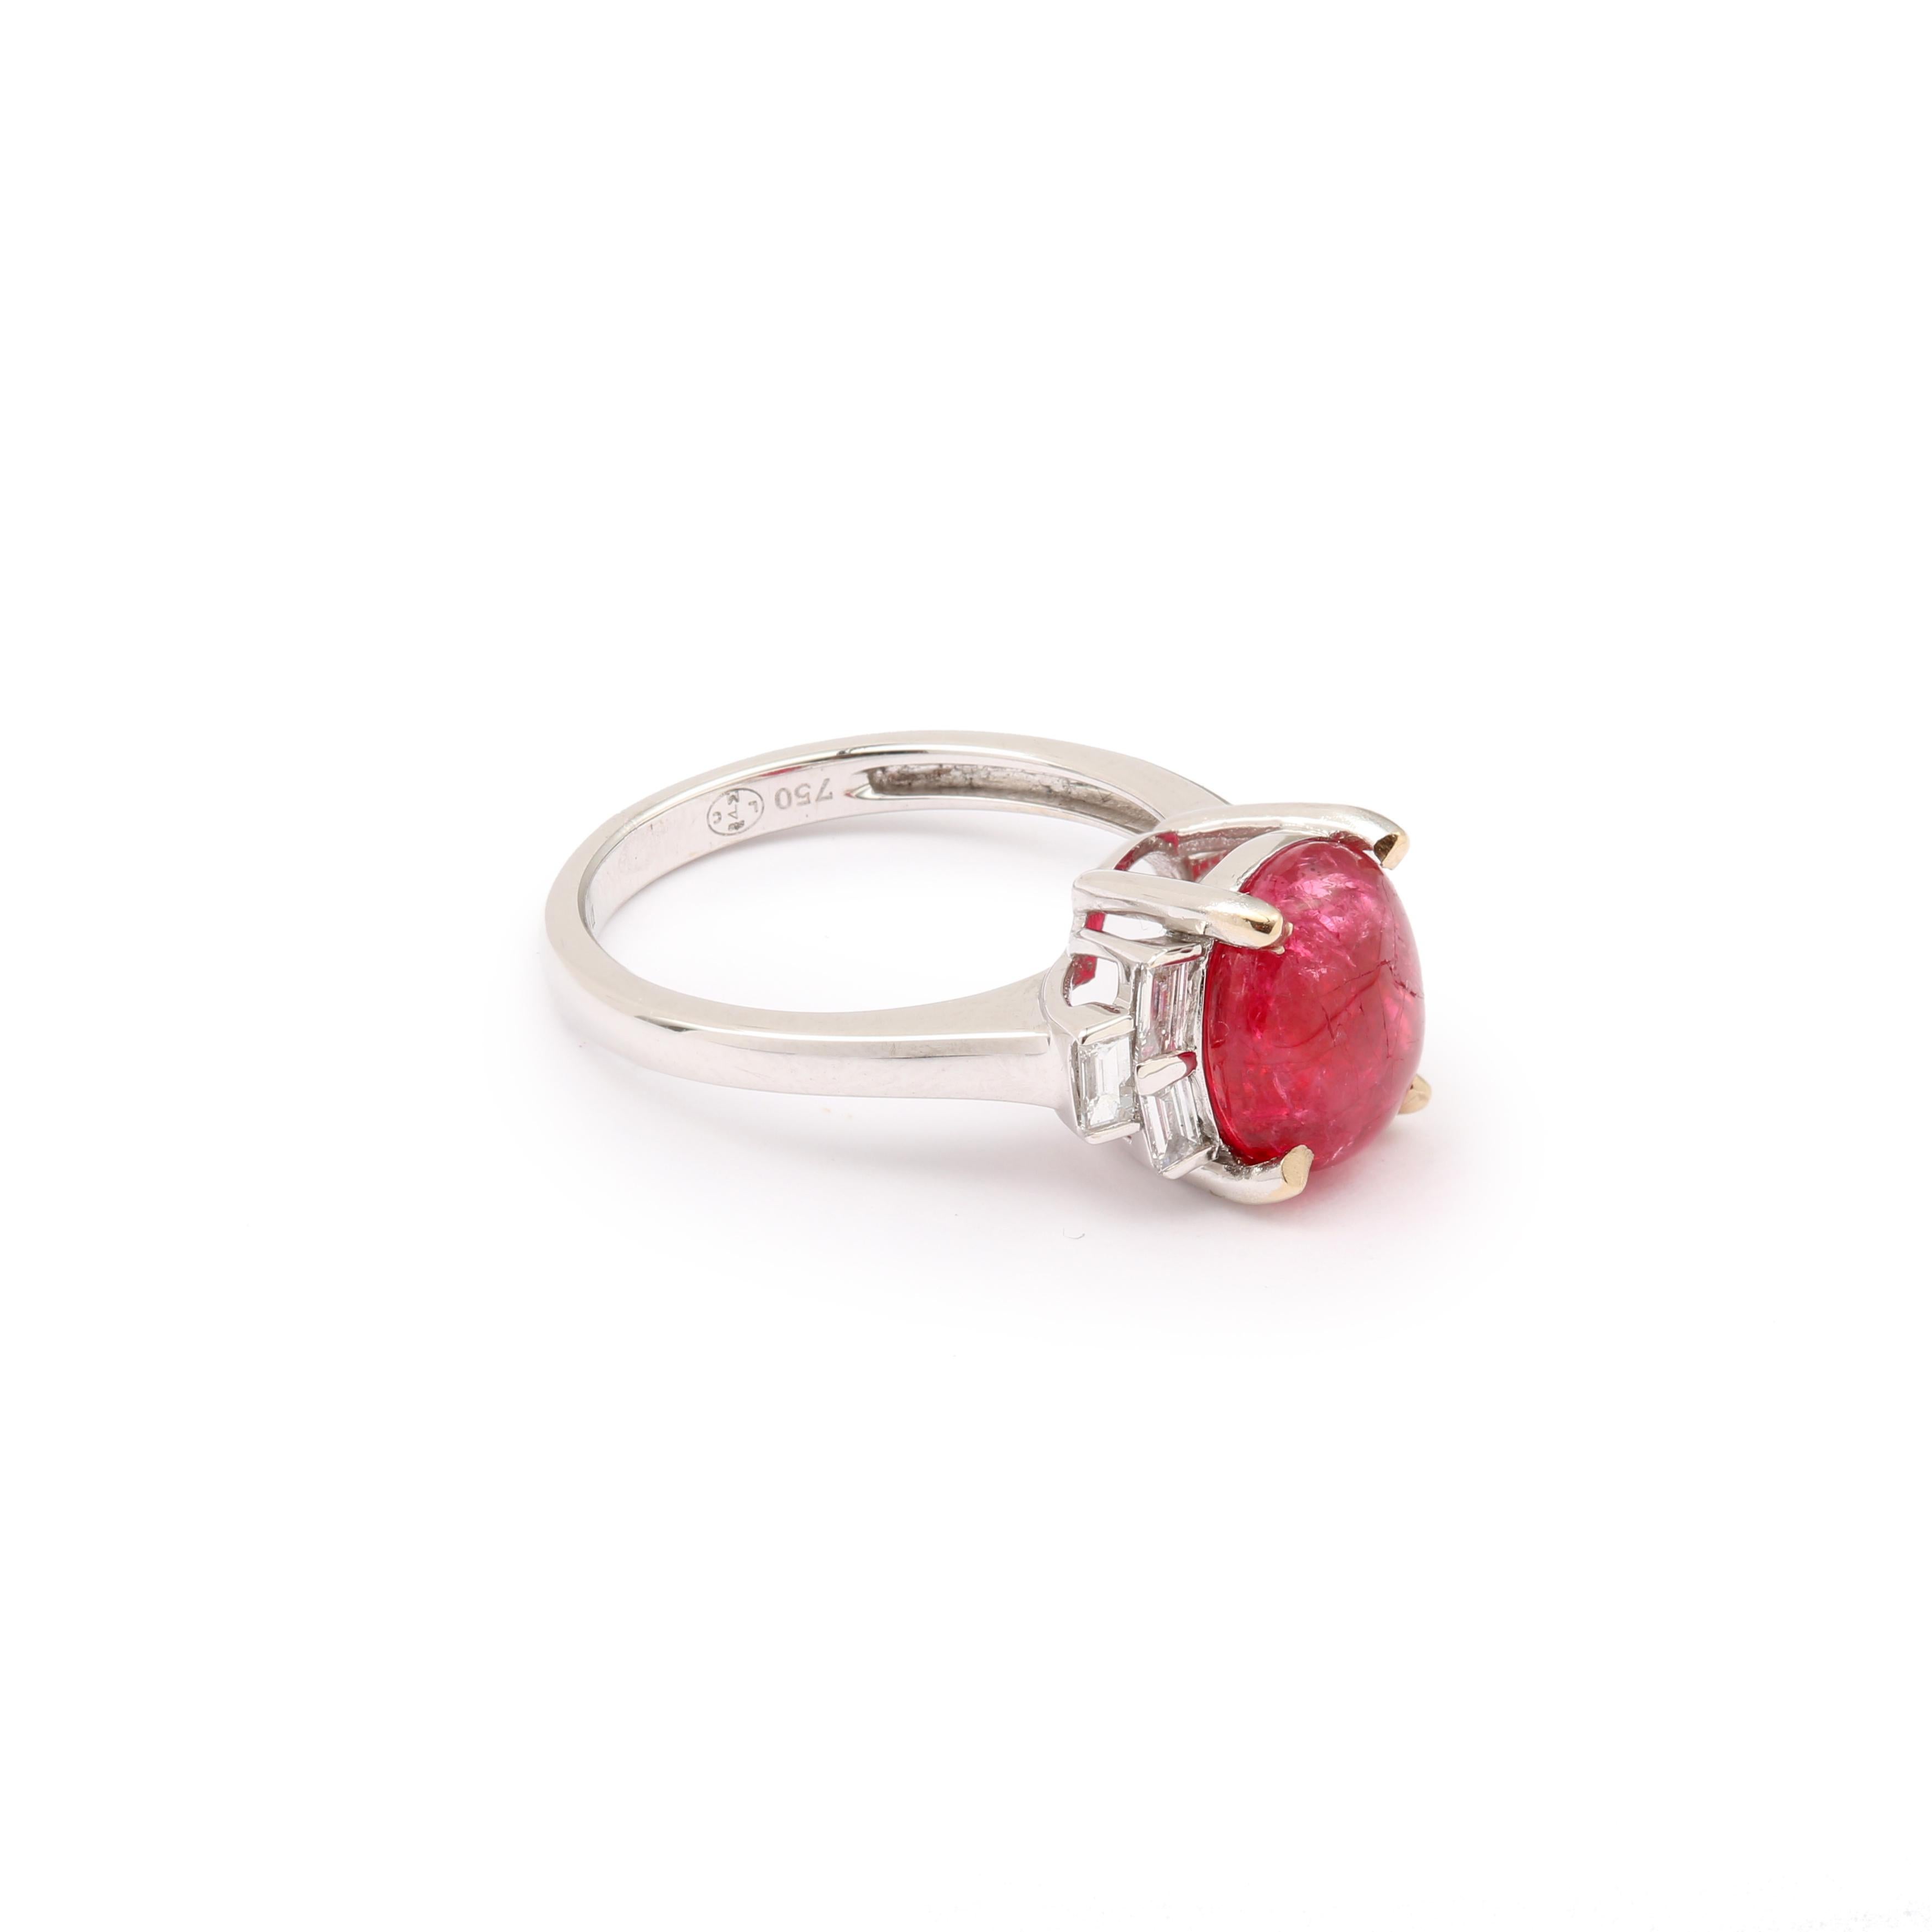 Magnificent ring set with a cabochon spinel probably of Burmese origin in a setting of baguette diamonds.

One of a kind.

Weight of the spinel : 4.01 carats

With Carat Gem Lab certificate, specifying natural spinel, intense red color, without